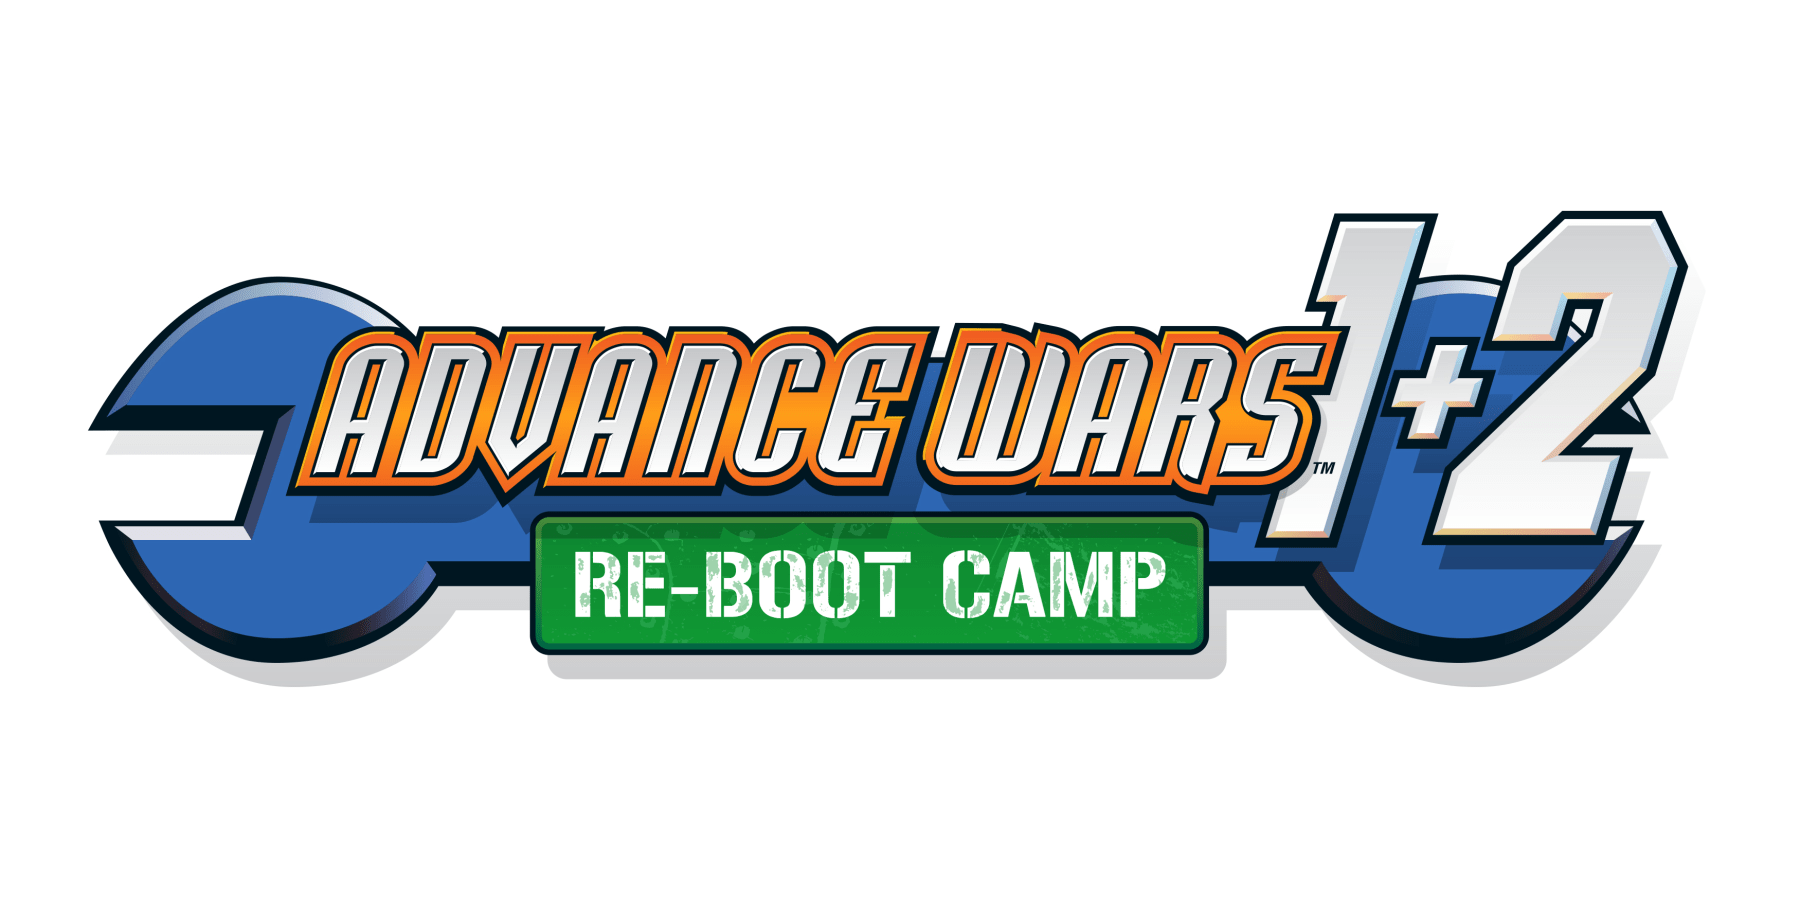 | News, Stats, Re-Boot Review: Advance and 1+2 for | Report Bleacher Camp Rumors Wars Videos and Scores, Switch Impressions Gameplay Highlights,